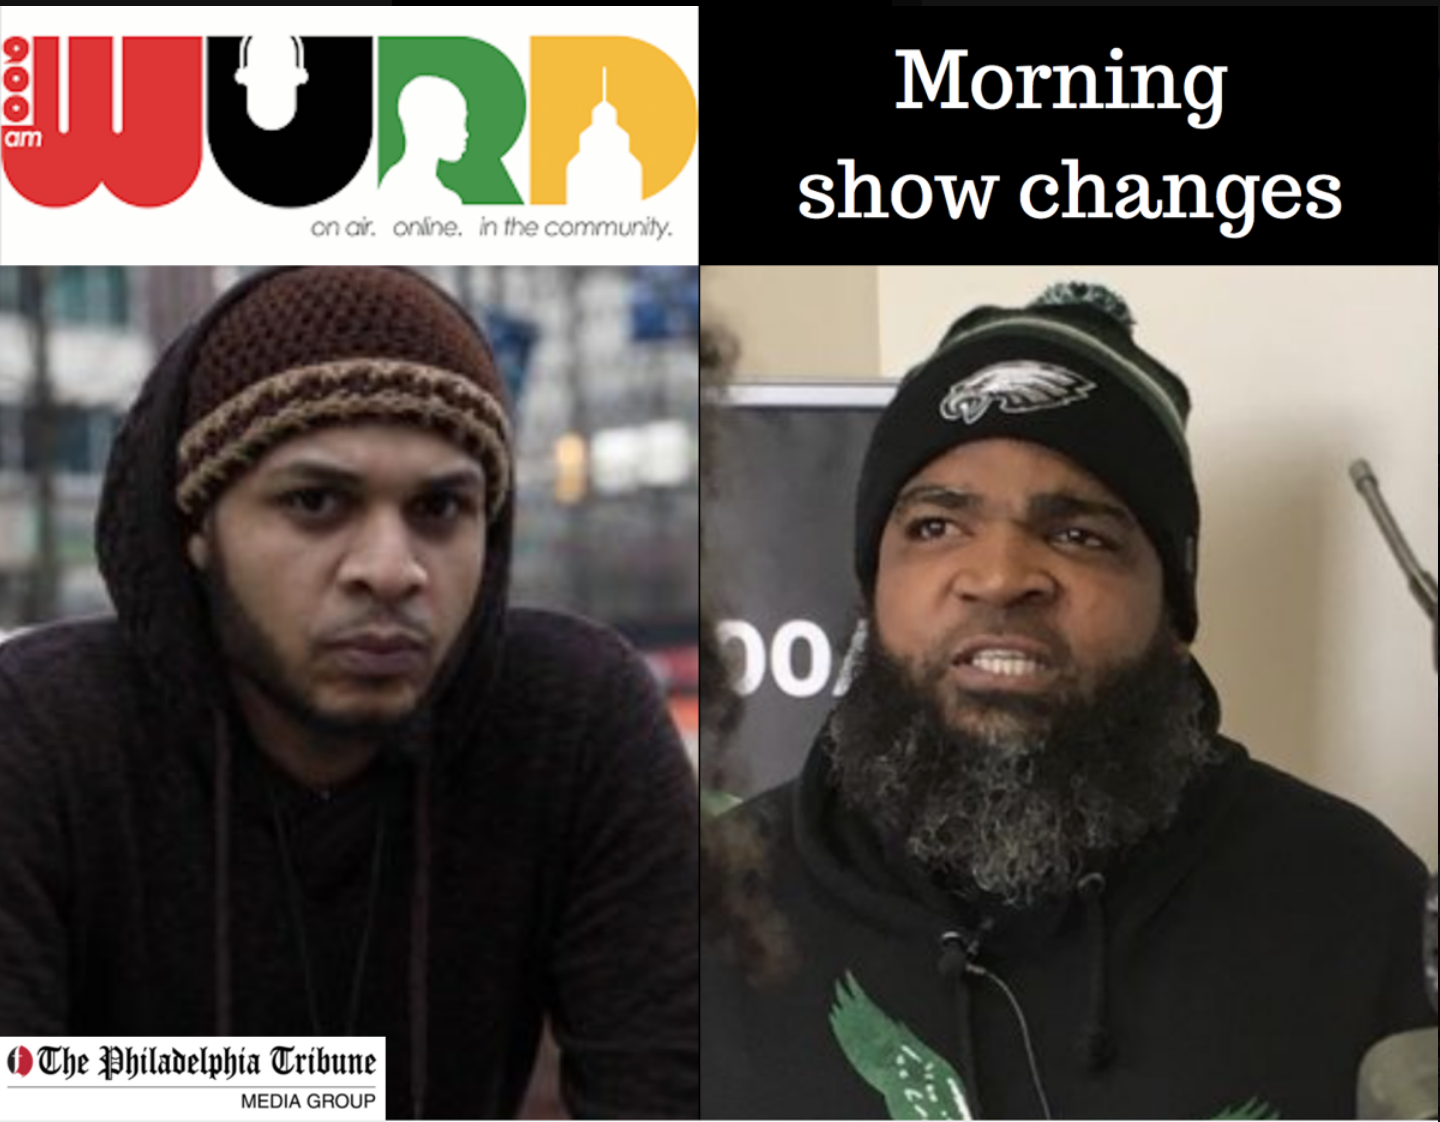 04/25/18 : WURD Radio changes morning show hosts again